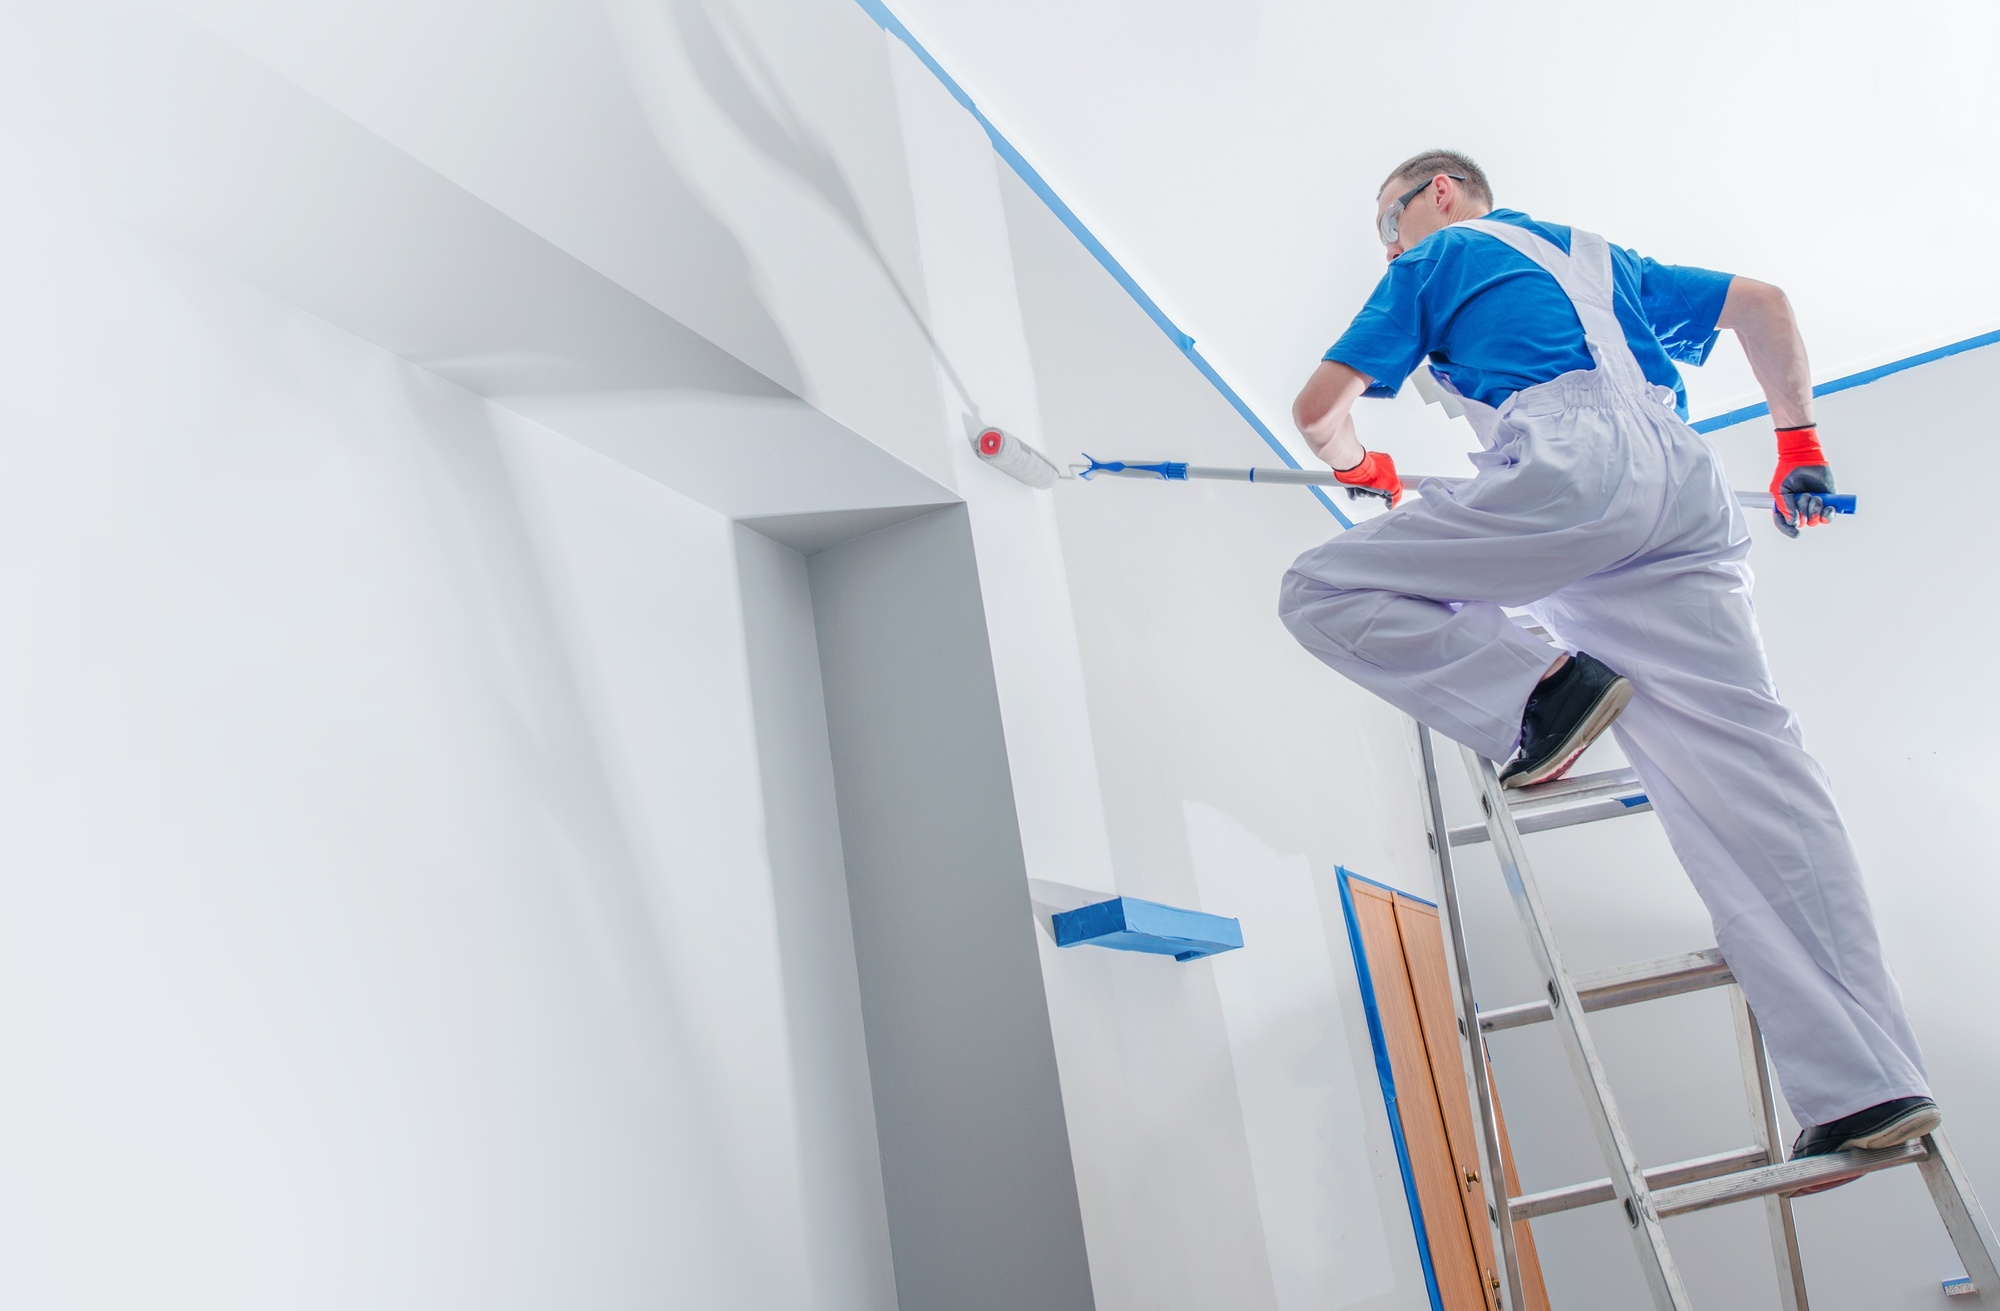 Finding the right professionals to paint your house requires knowing your options. Here is the complete guide to choosing a painting company for homeowners.